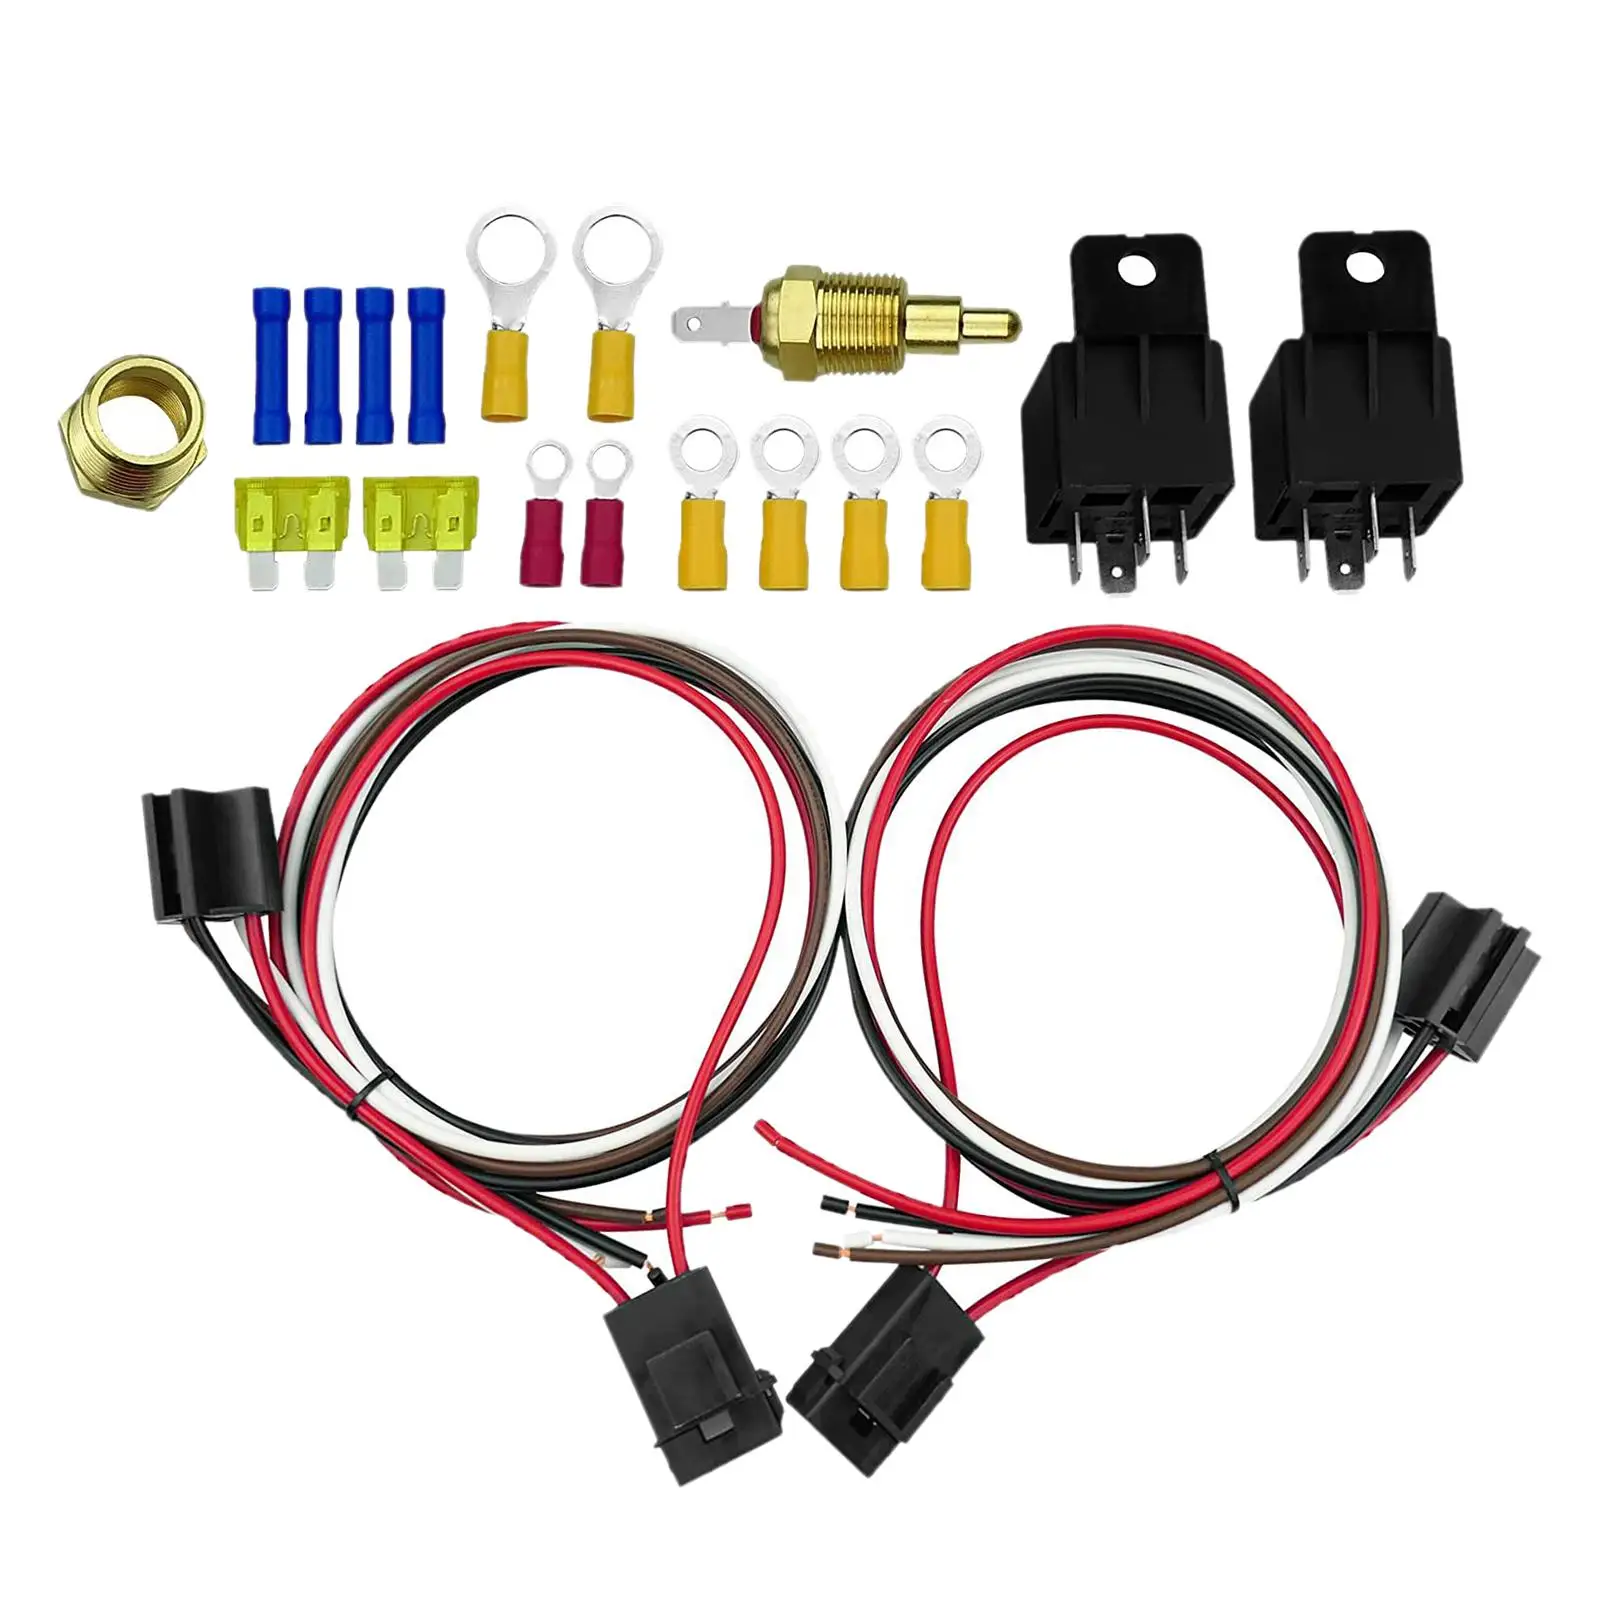 Auto Dual Electric Cooling Harness Kit 185 On 175 Off 40 Amp Relay